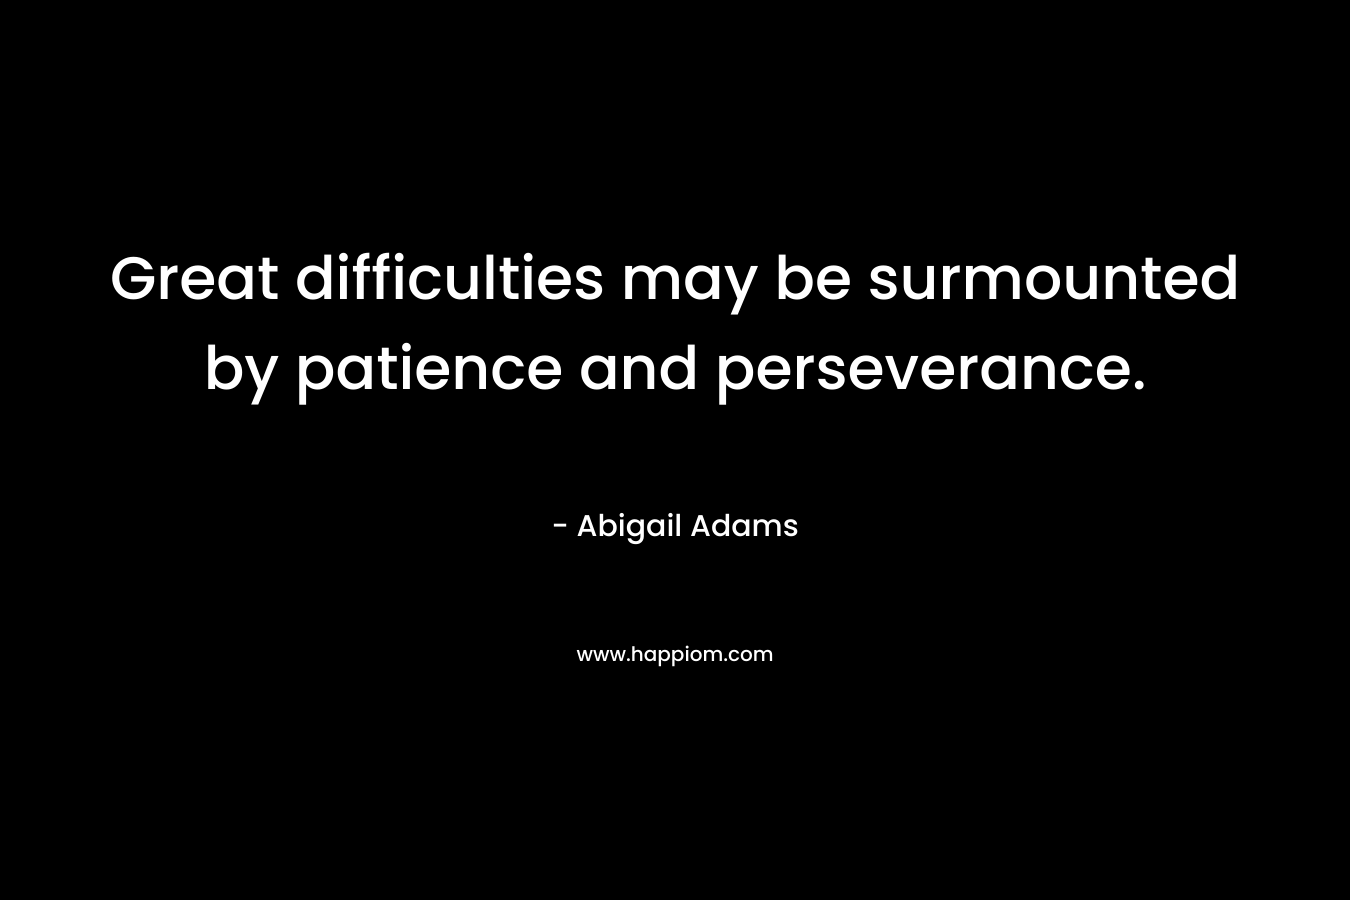 Great difficulties may be surmounted by patience and perseverance. – Abigail Adams